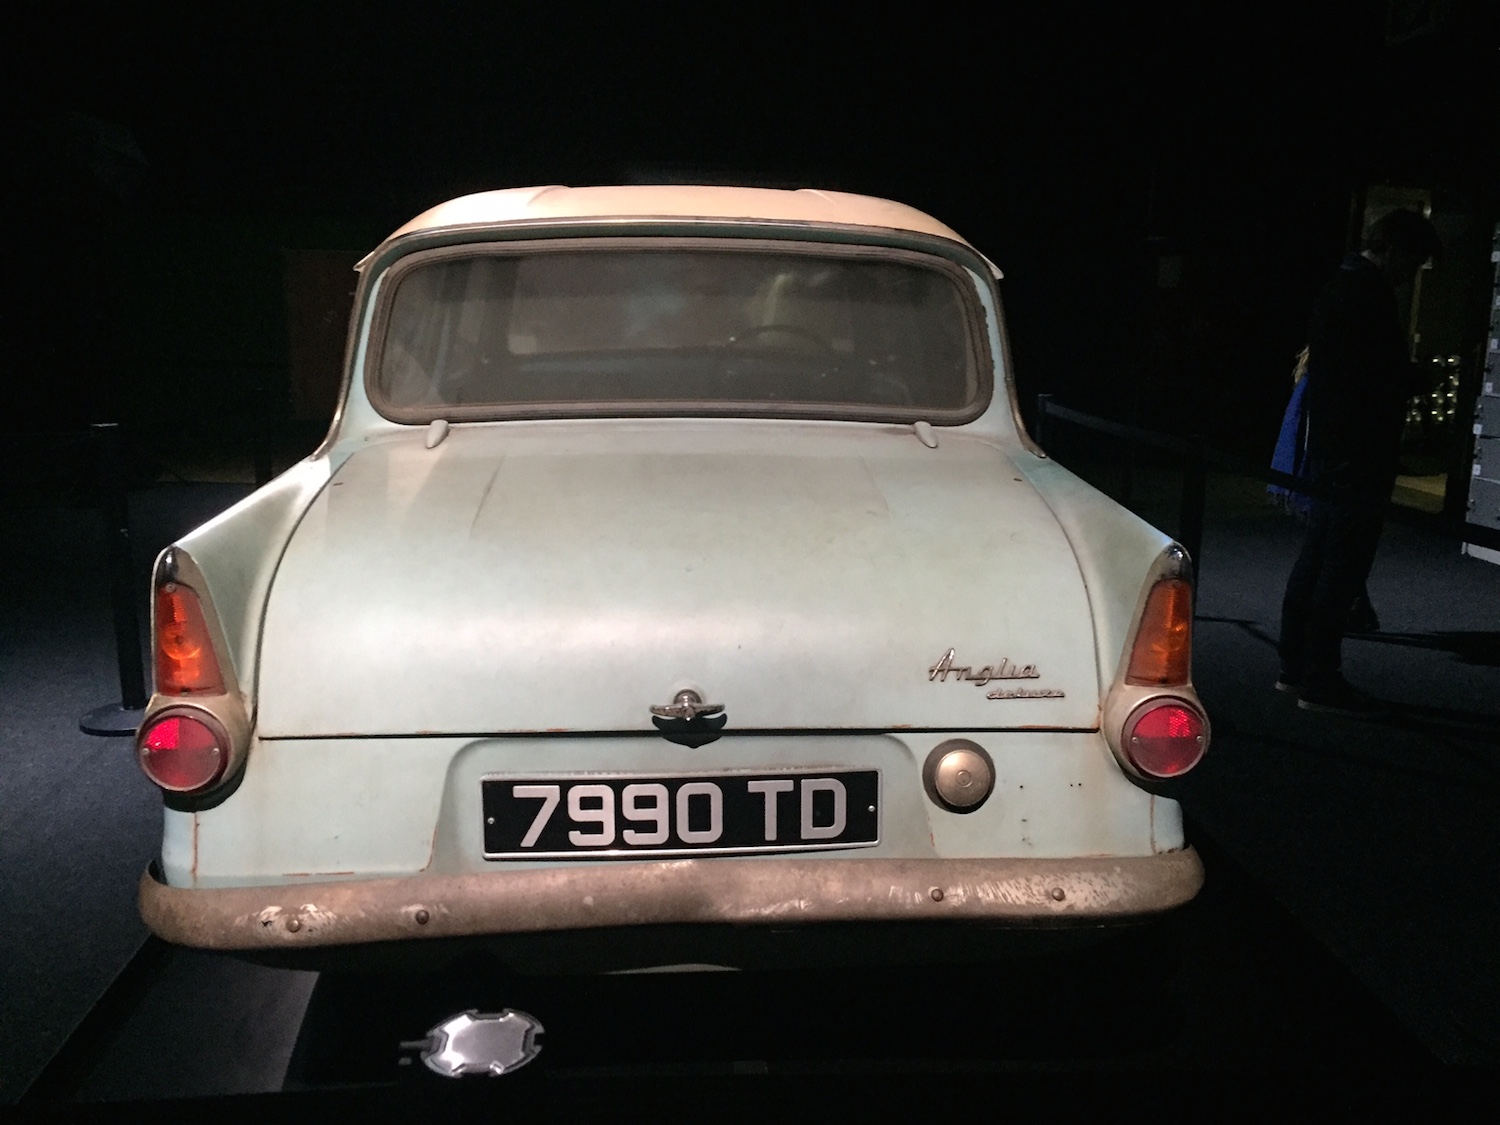 The Ford Anglia from “Harry Potter and the Chamber of Secrets”